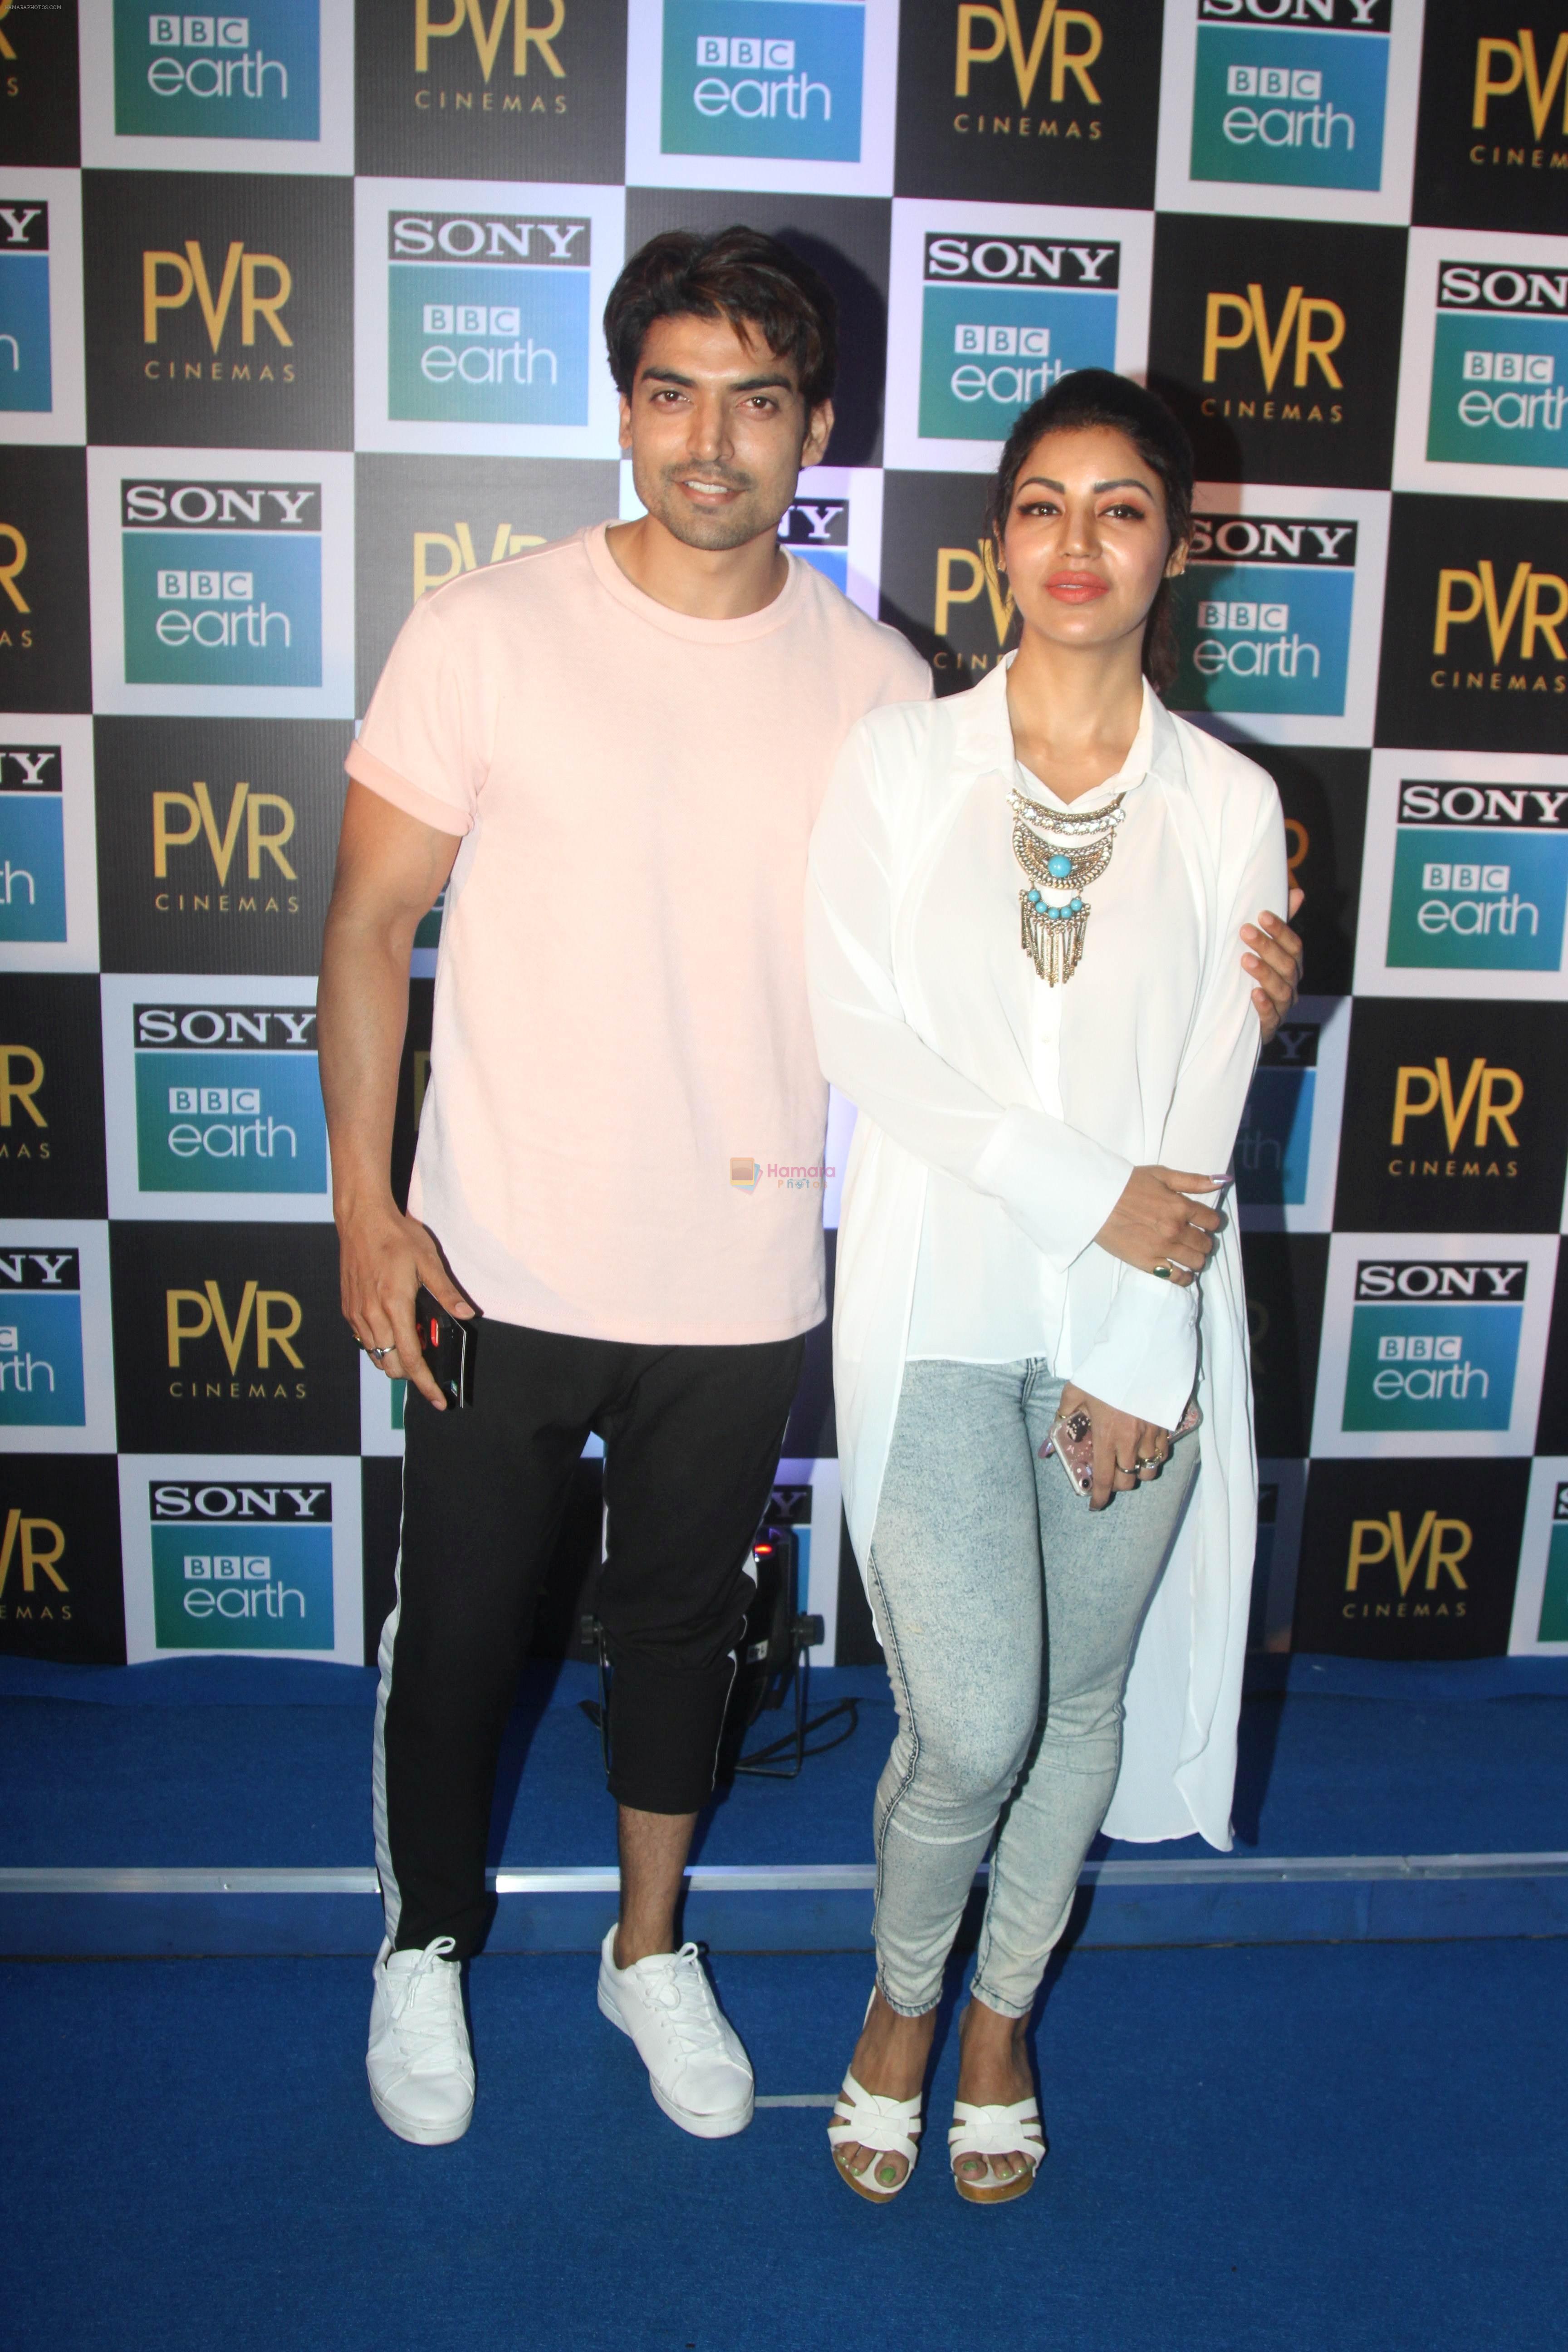 Gurmeet and Debina at the Screening of Sony BBC Earth's film Blue Planet 2 at pvr icon in andheri on 15th May 2018